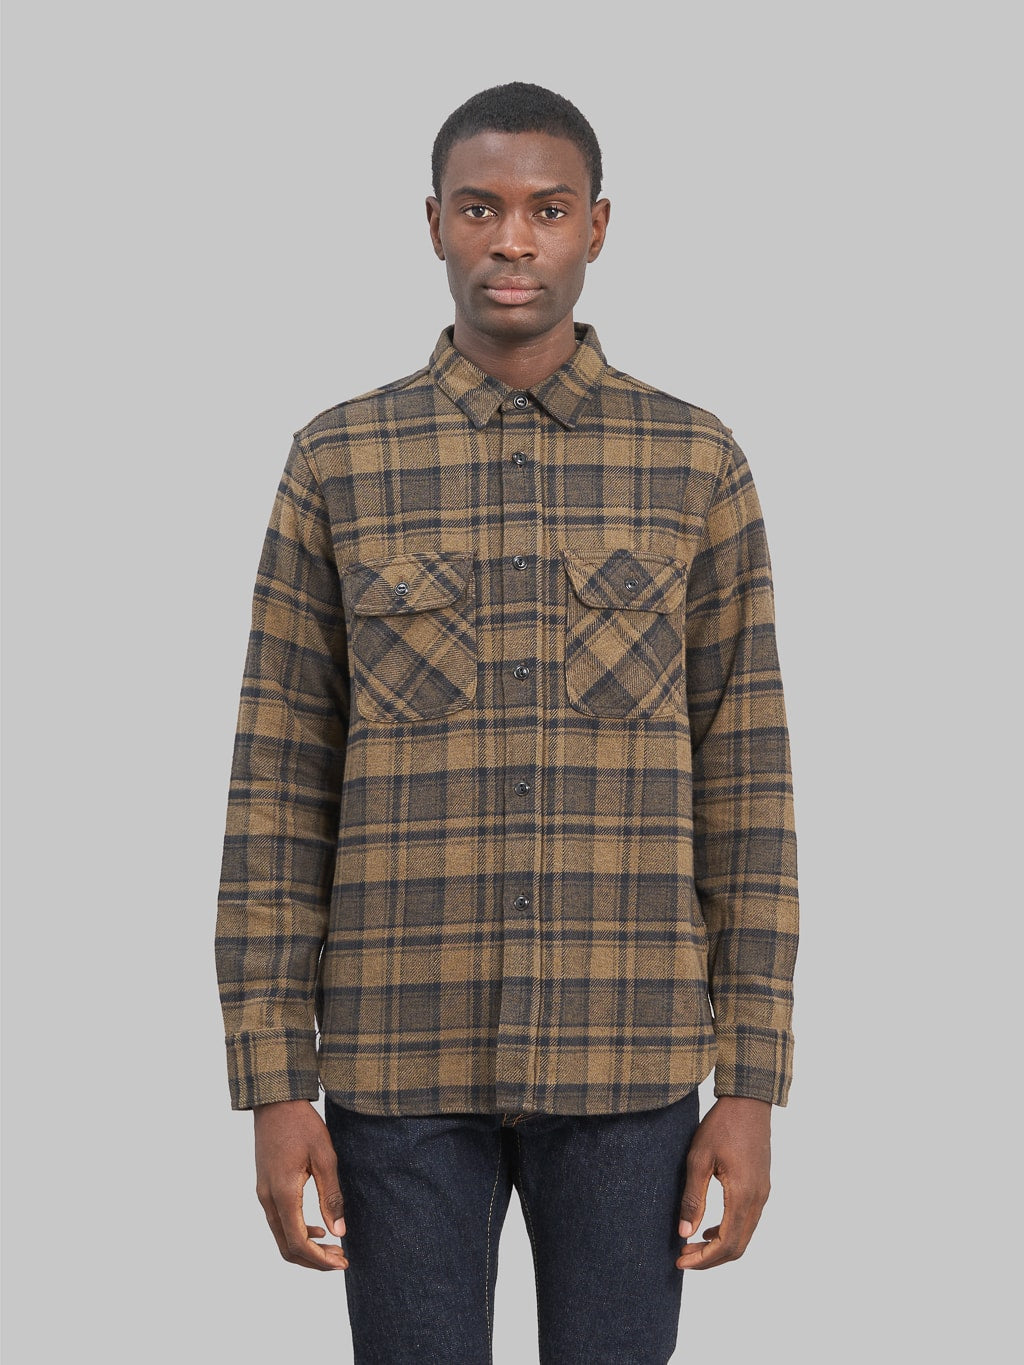 Fob Factory F3497 Nel Check Work flannel Shirt Brown style